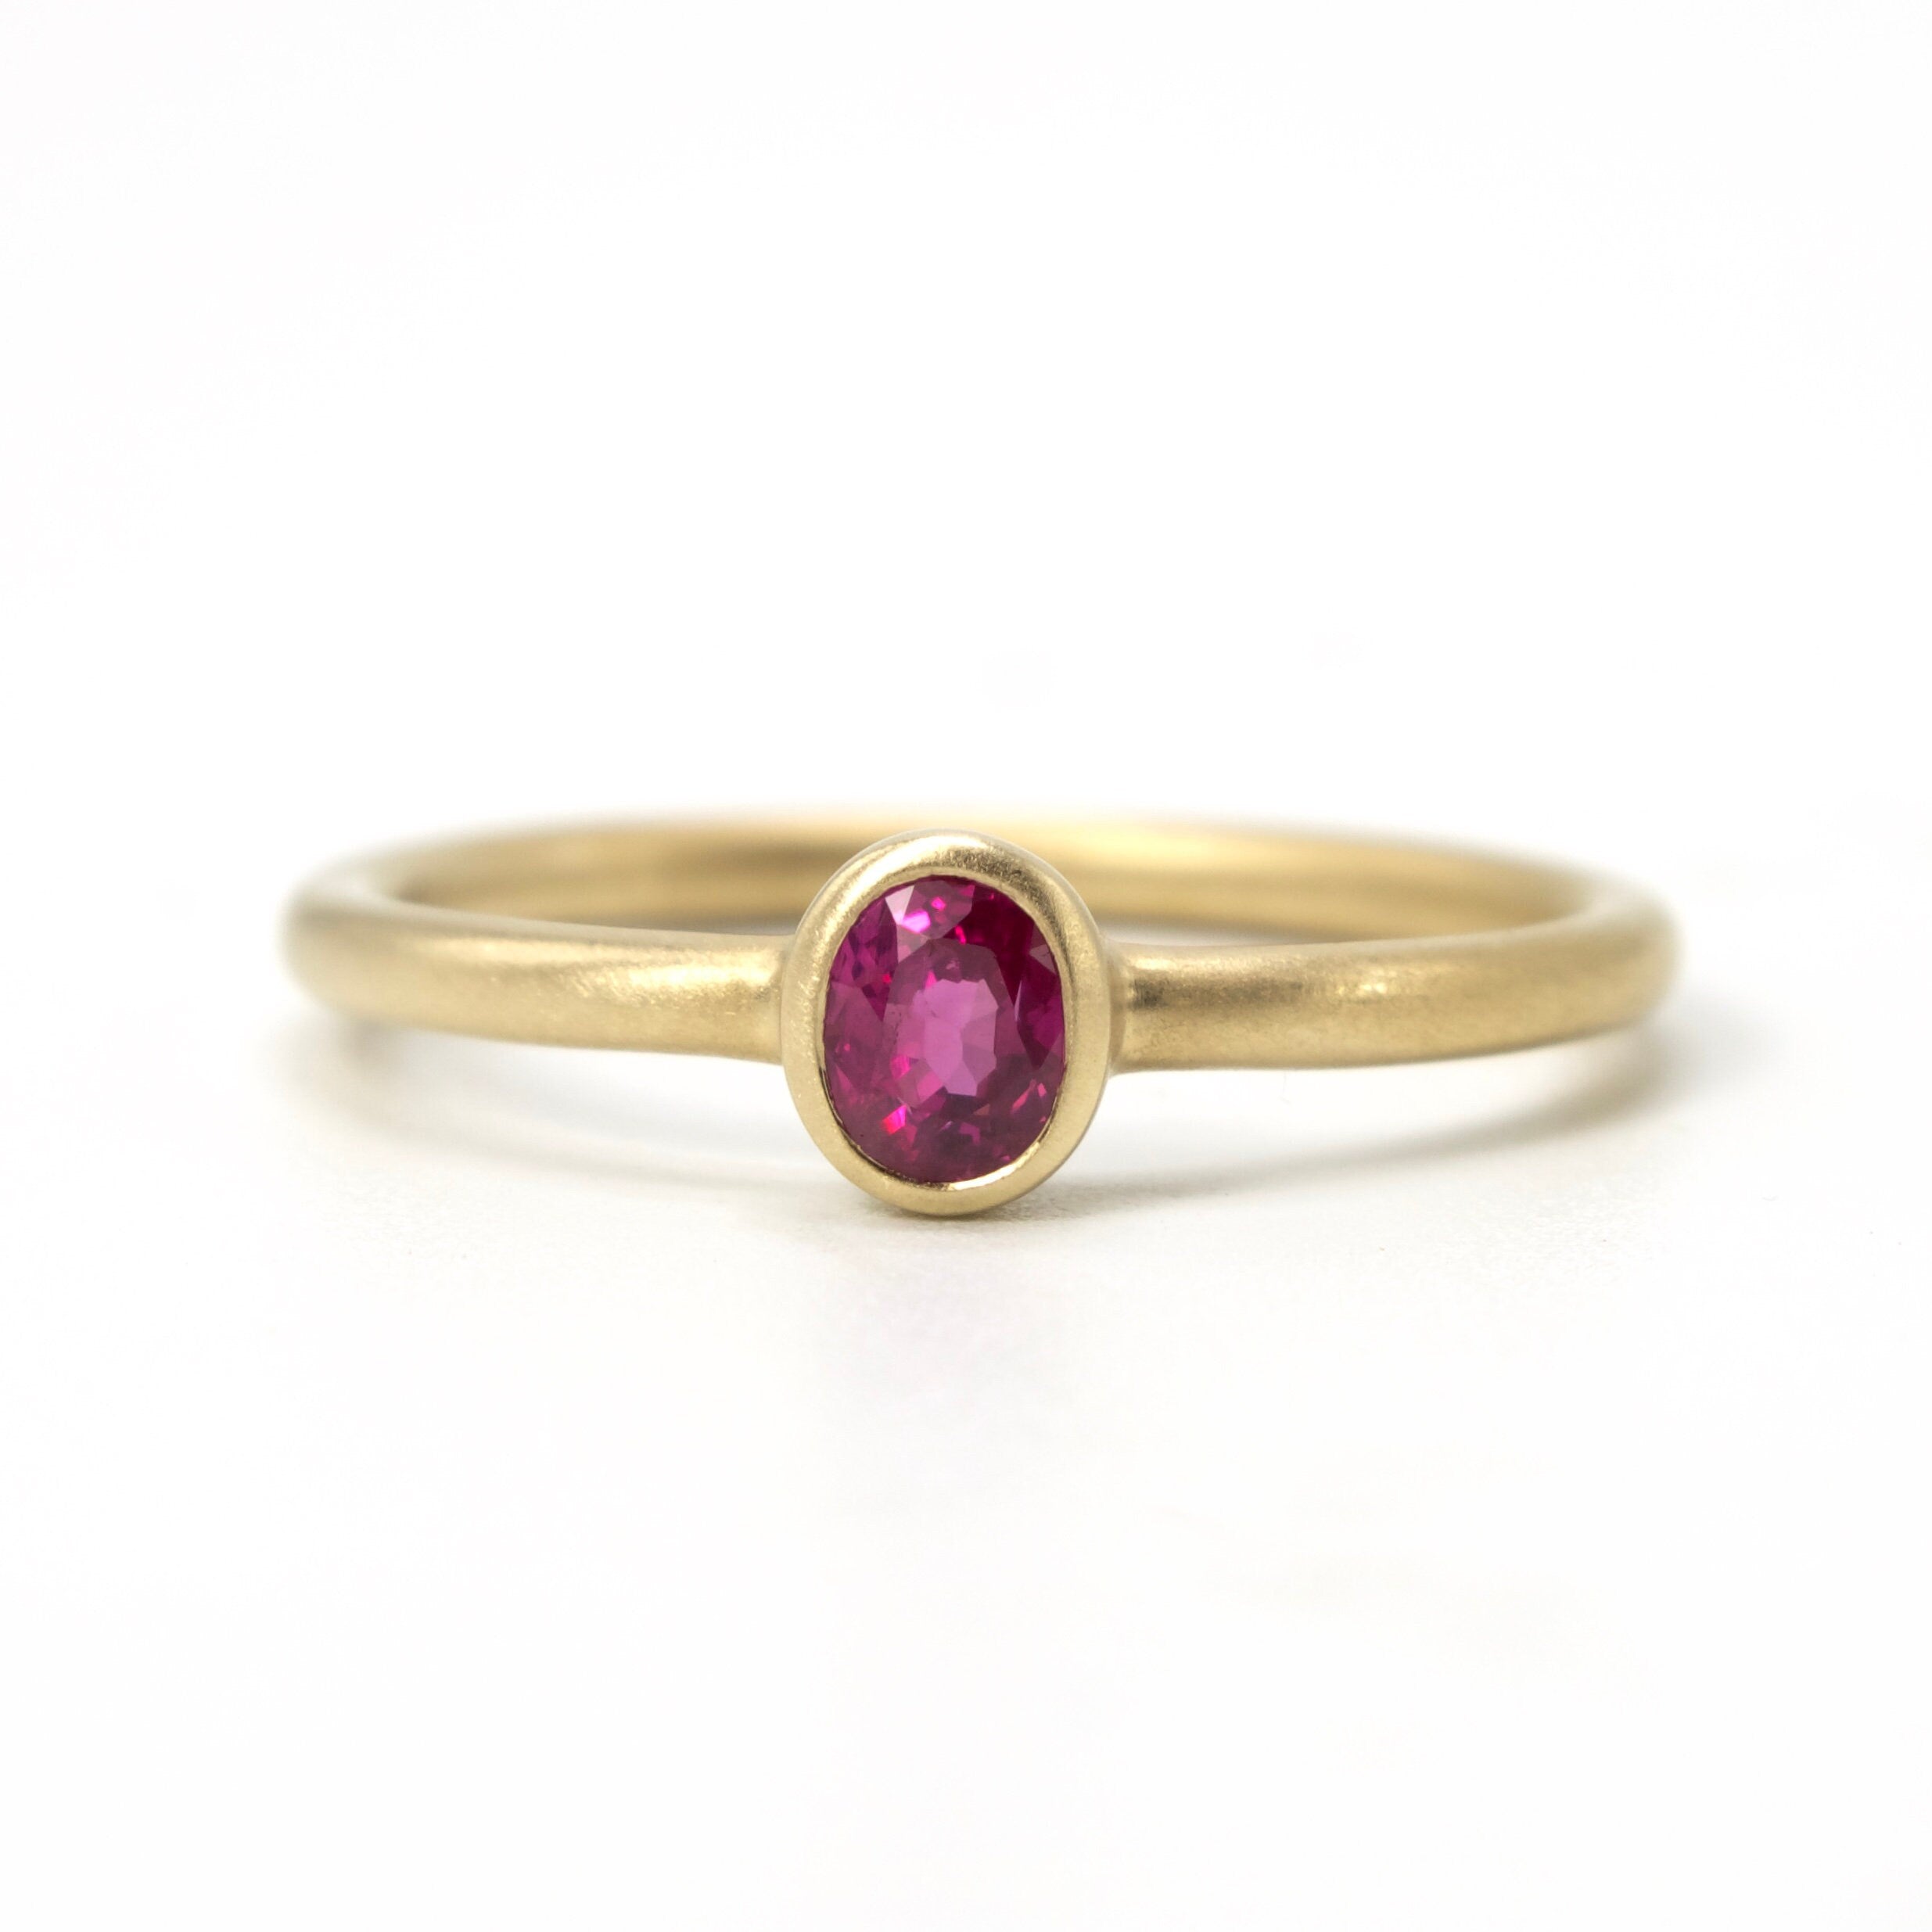 Bezel Set Oval Cut Ruby Solitaire in Brushed Gold Mounting